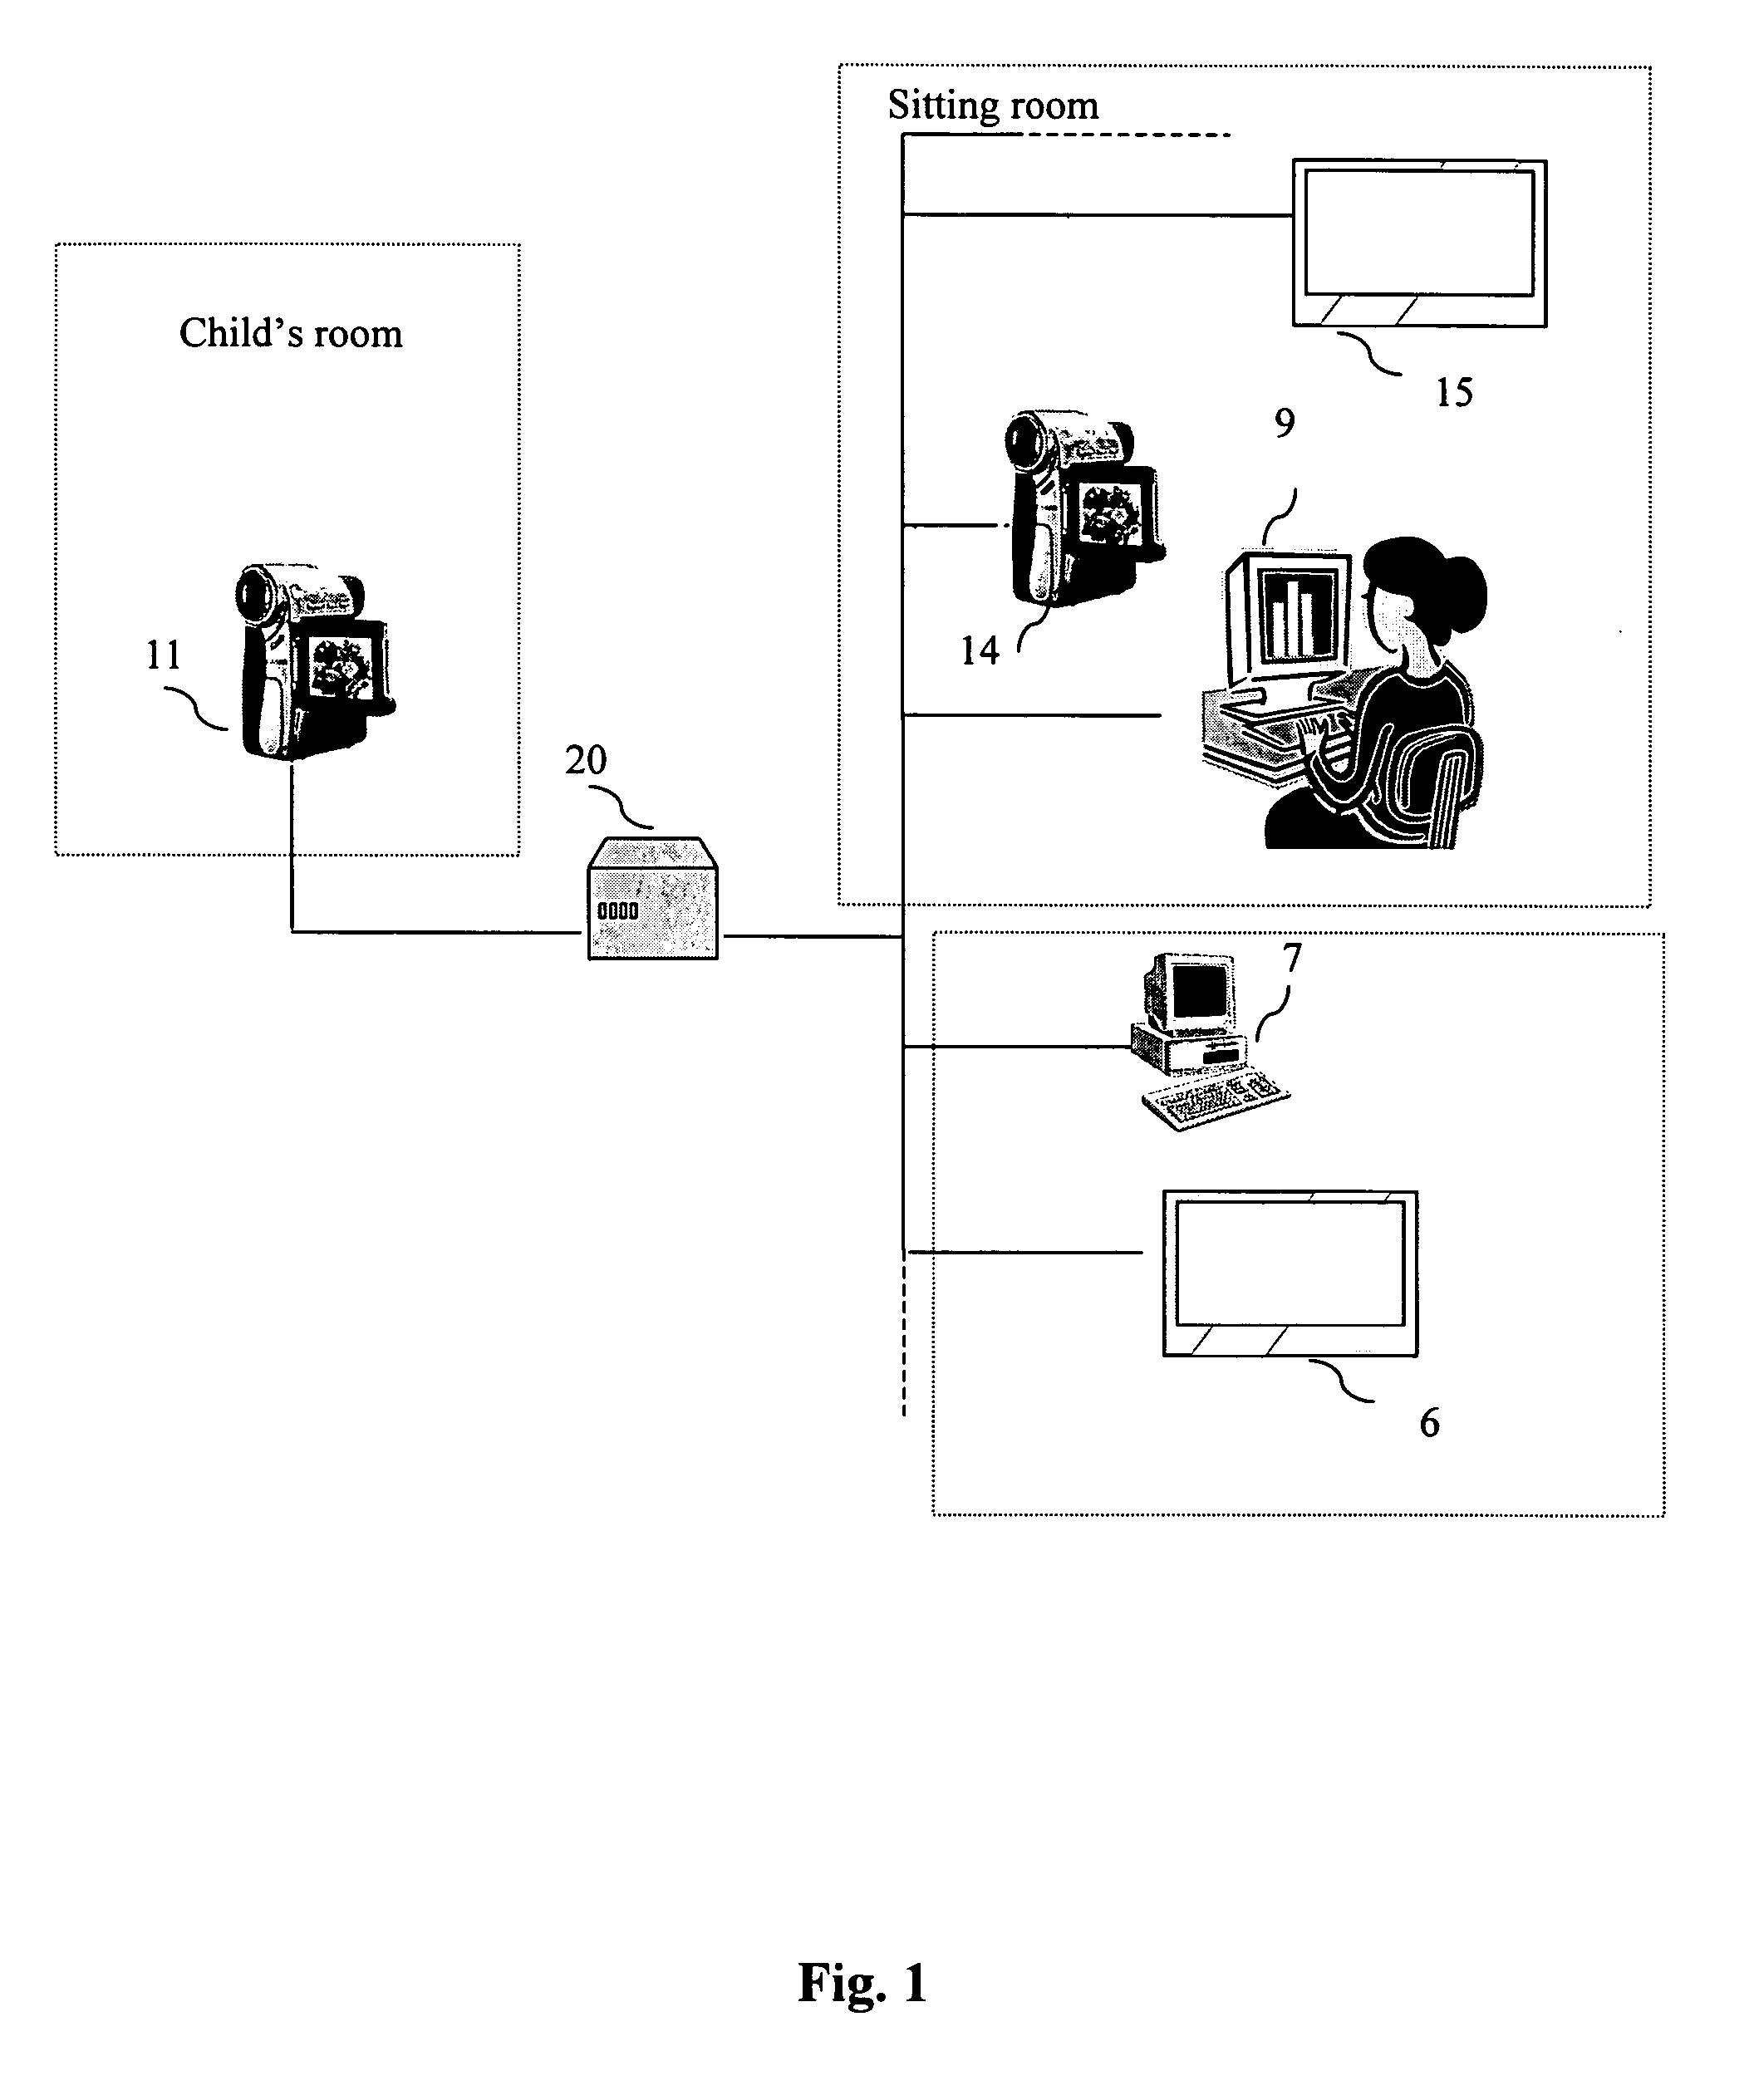 Method of video monitoring, corresponding device, system and computer programs